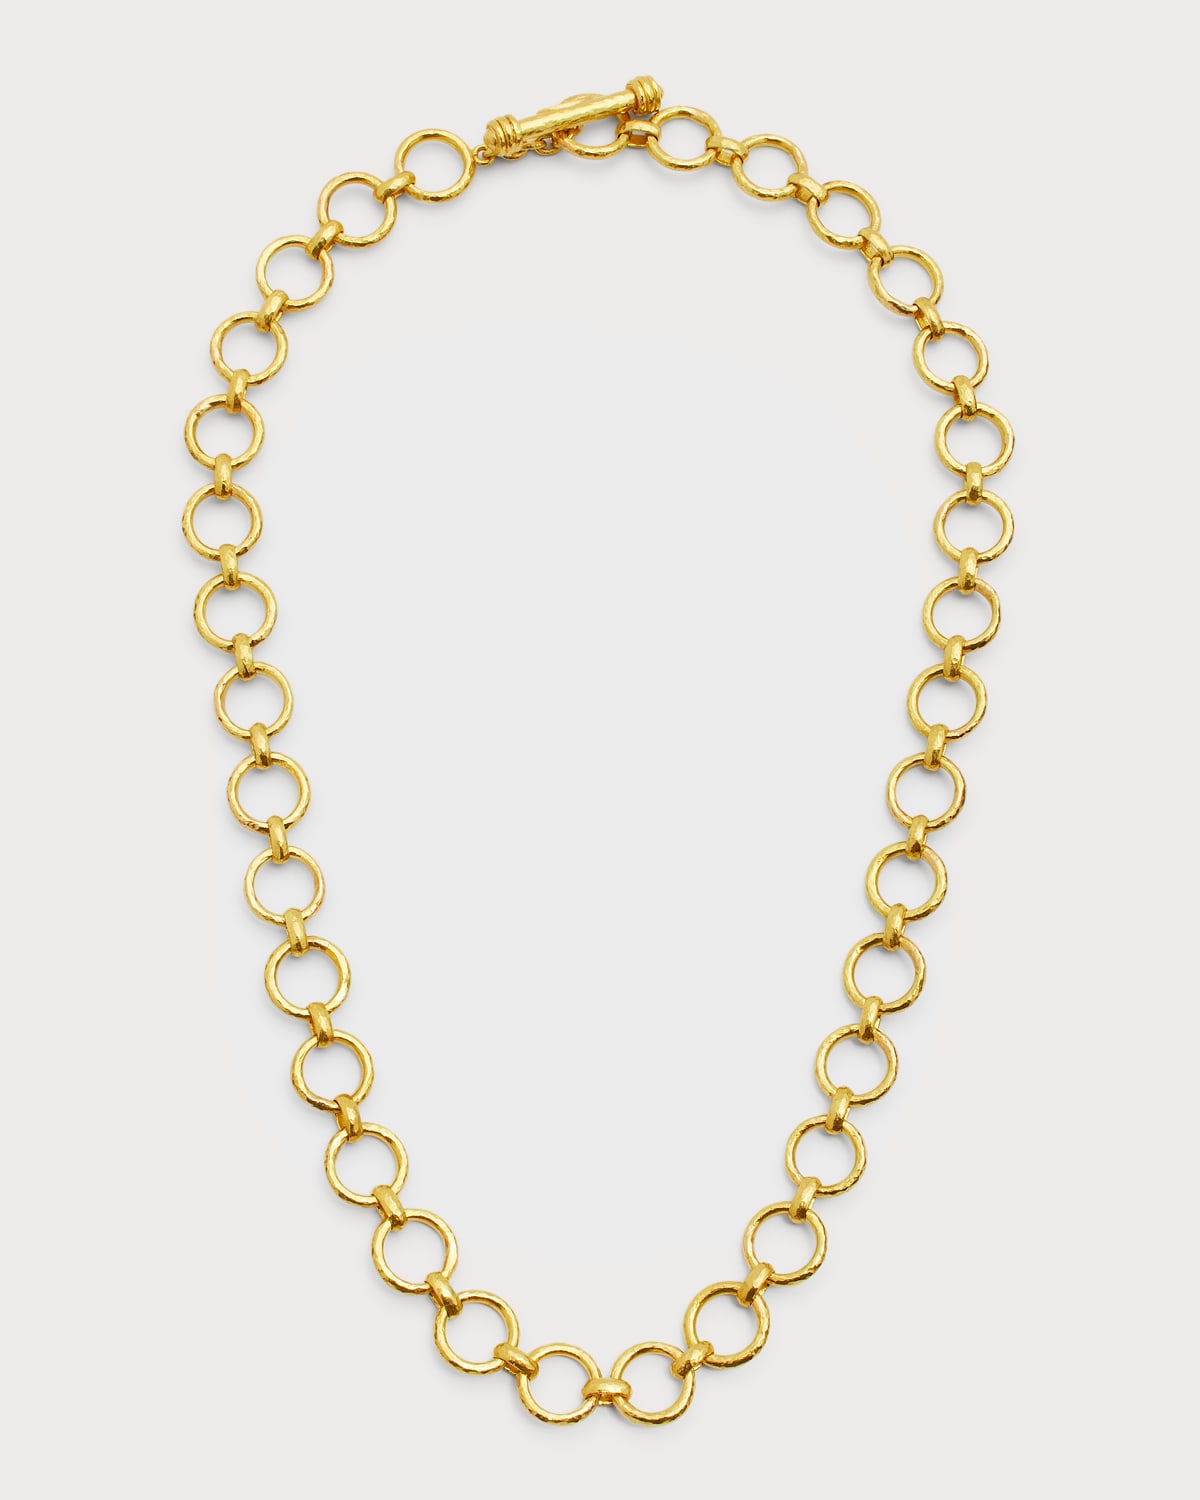 19K Yellow Gold Large Farnese Link Necklace with Toggle, 21"L